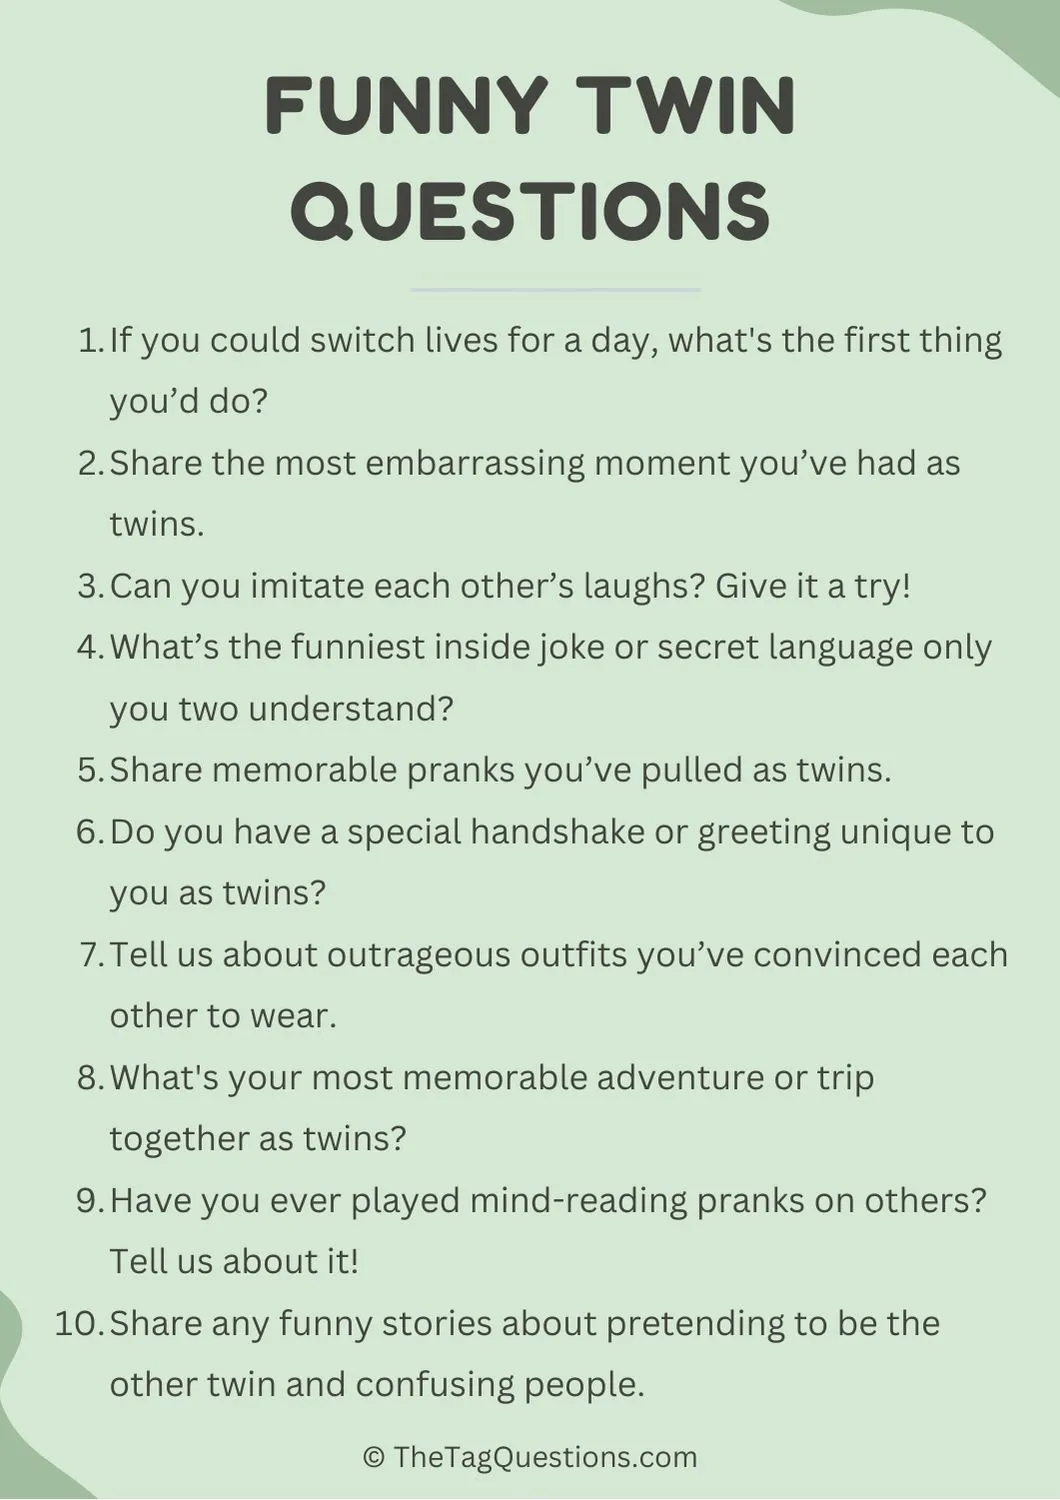 100 Fun Twin Tag Questions to Test Your Twin Telepathy